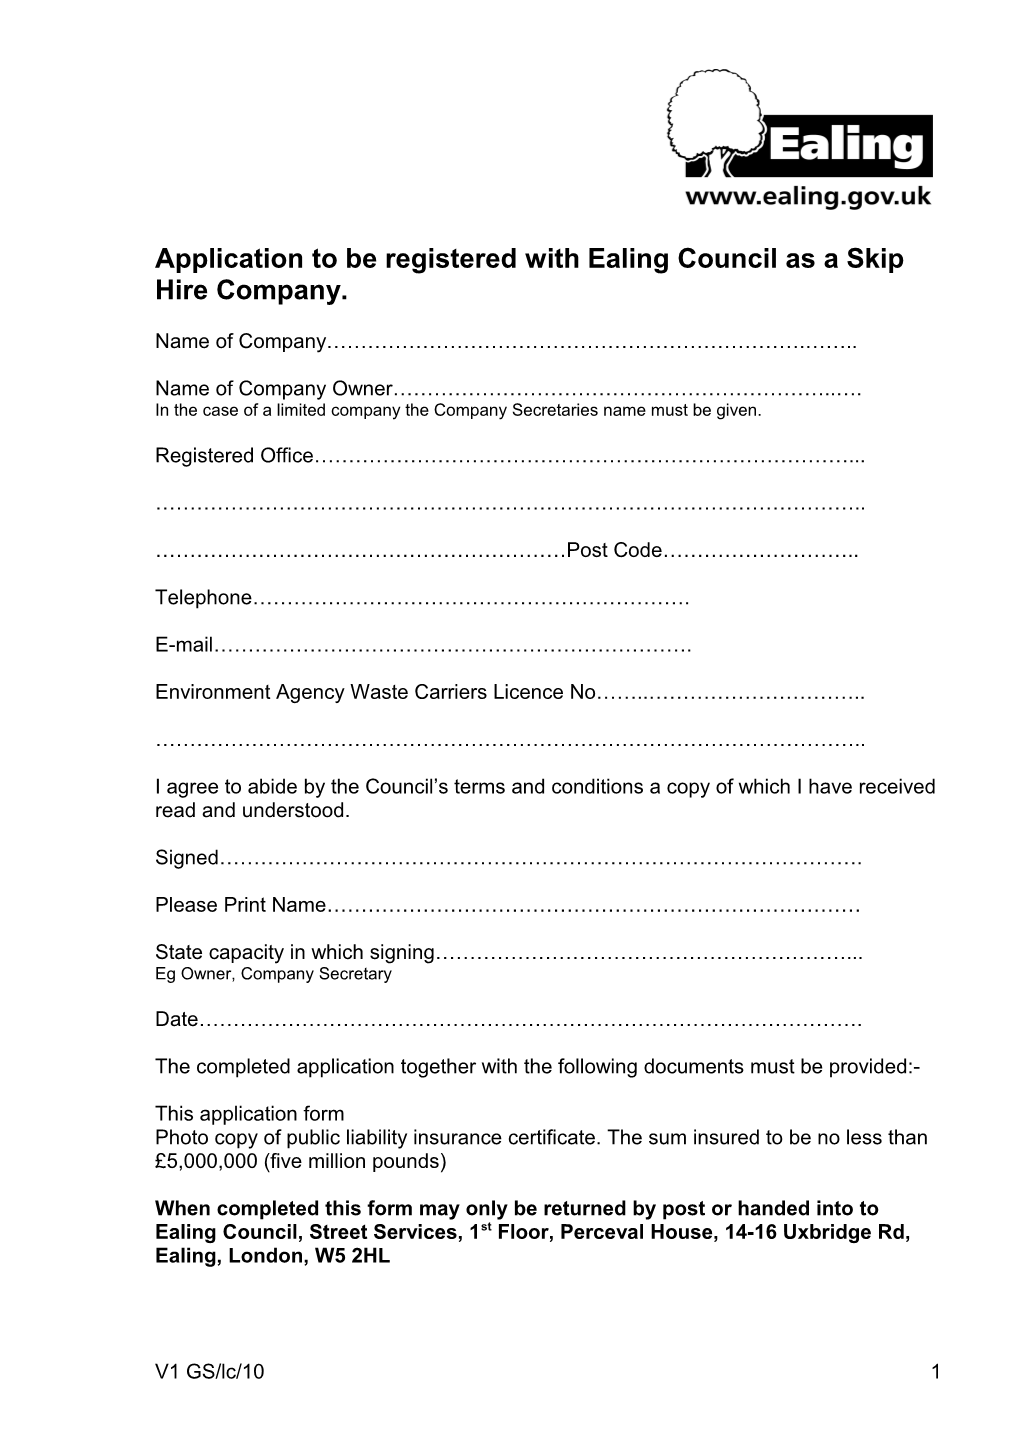 Application to Be Registered with Ealing Council As a Skip Hire Company